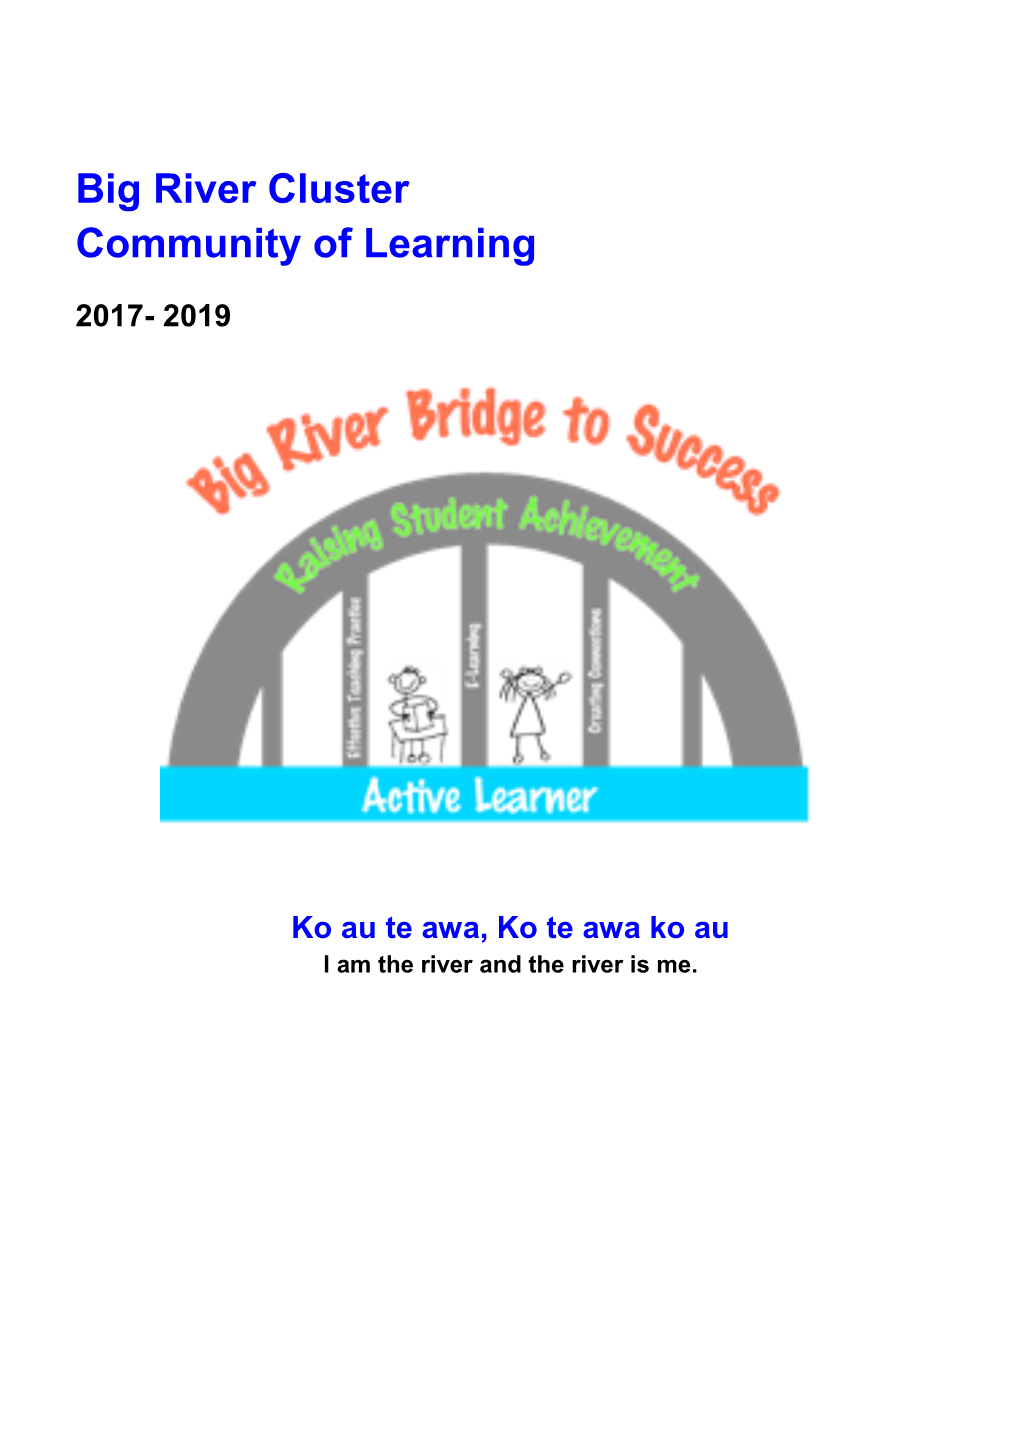 Big River Cluster Community of Learning